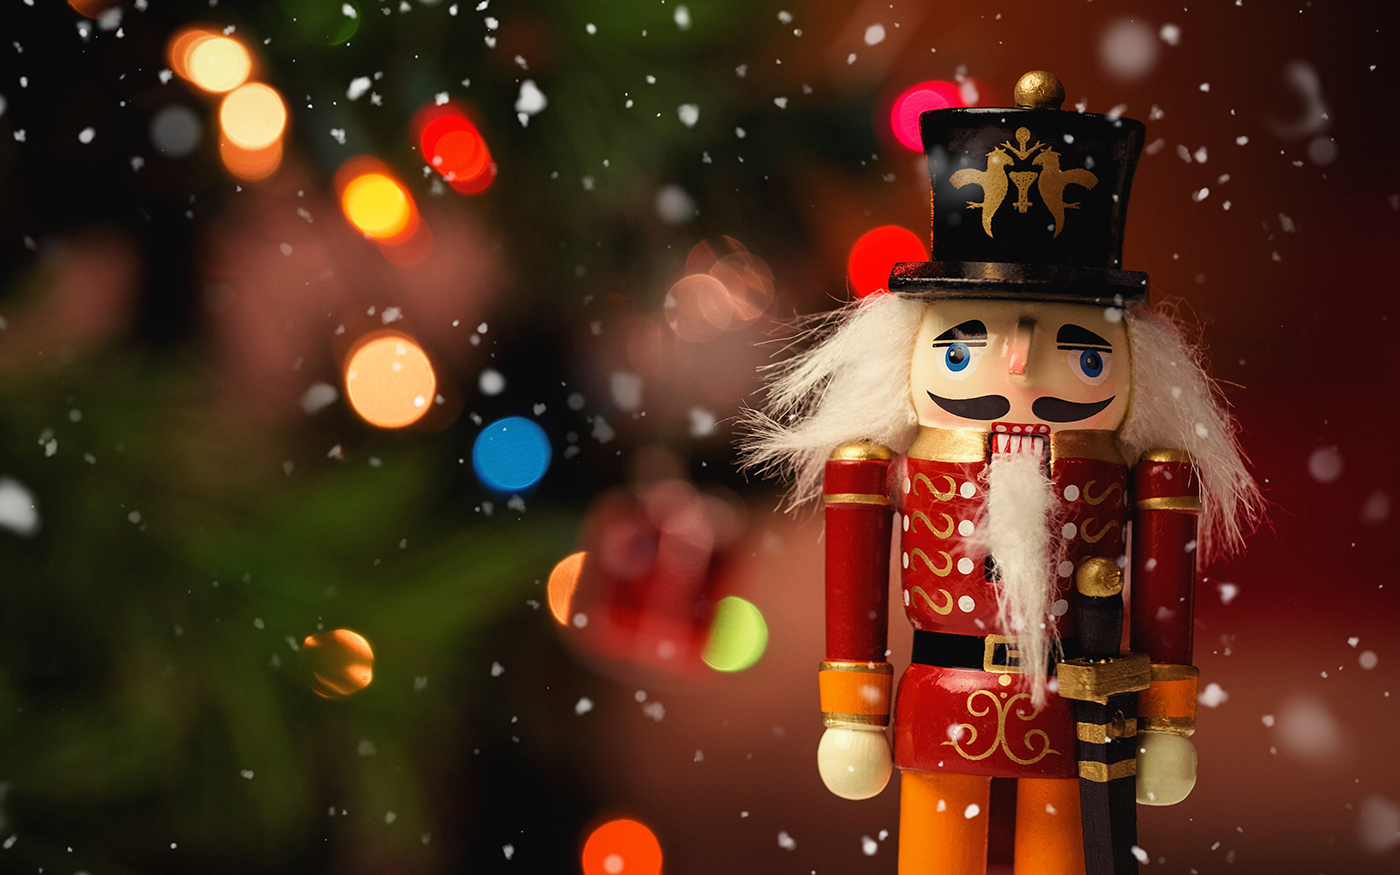 colorful wooden nutcracker soldier shown against Christmas tree bokeh